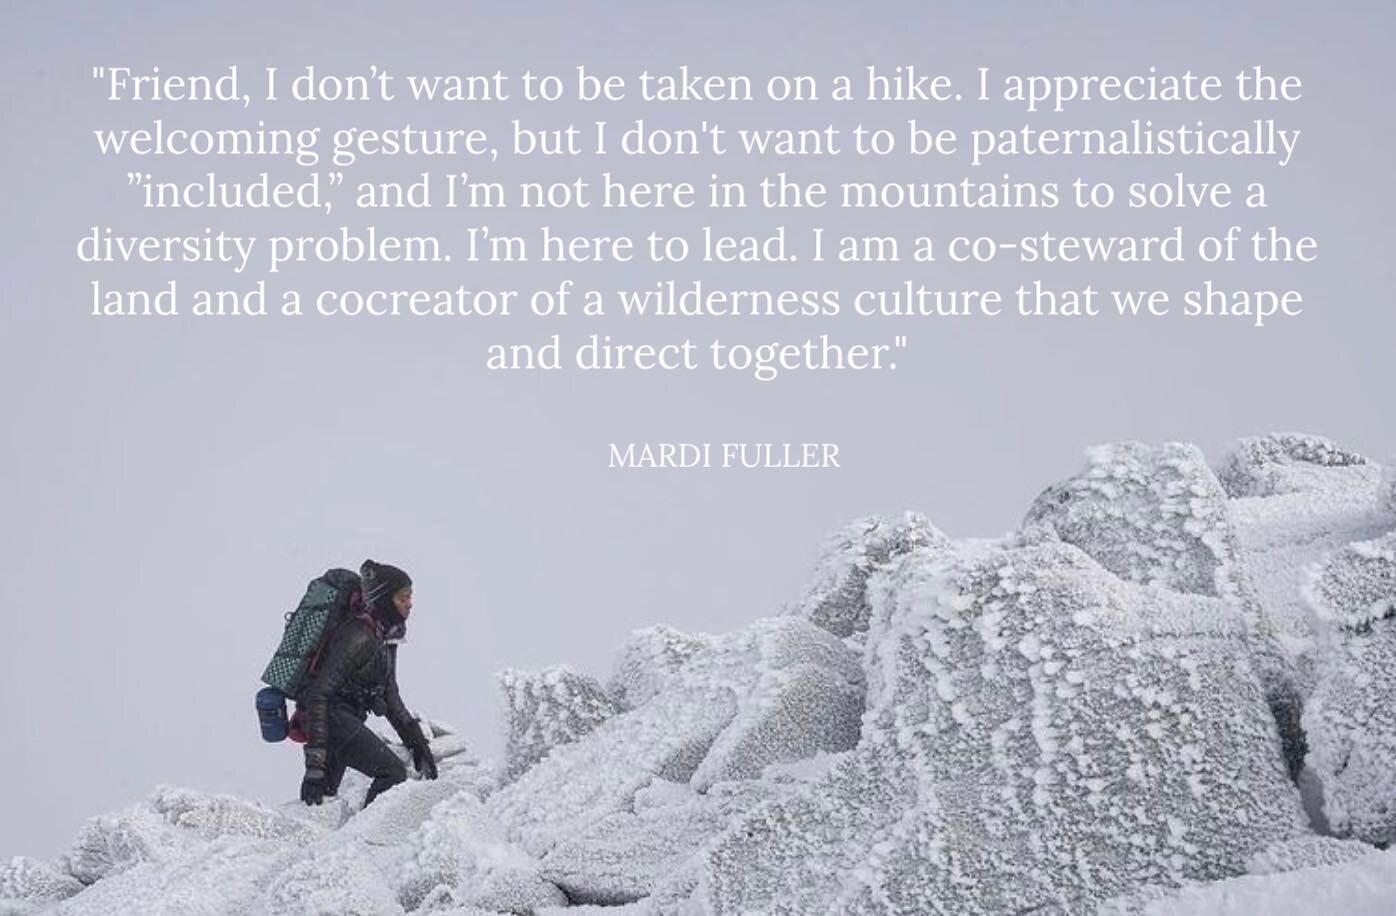 A quote from Mardi Fuller&rsquo;s article, &ldquo;A Place of Freedom and Belonging in the Great Outdoors.&rdquo;
To hear more of Mardi&rsquo;s voice, you can find her full article on NRDC.org

Photo credit: Joe Klementovich